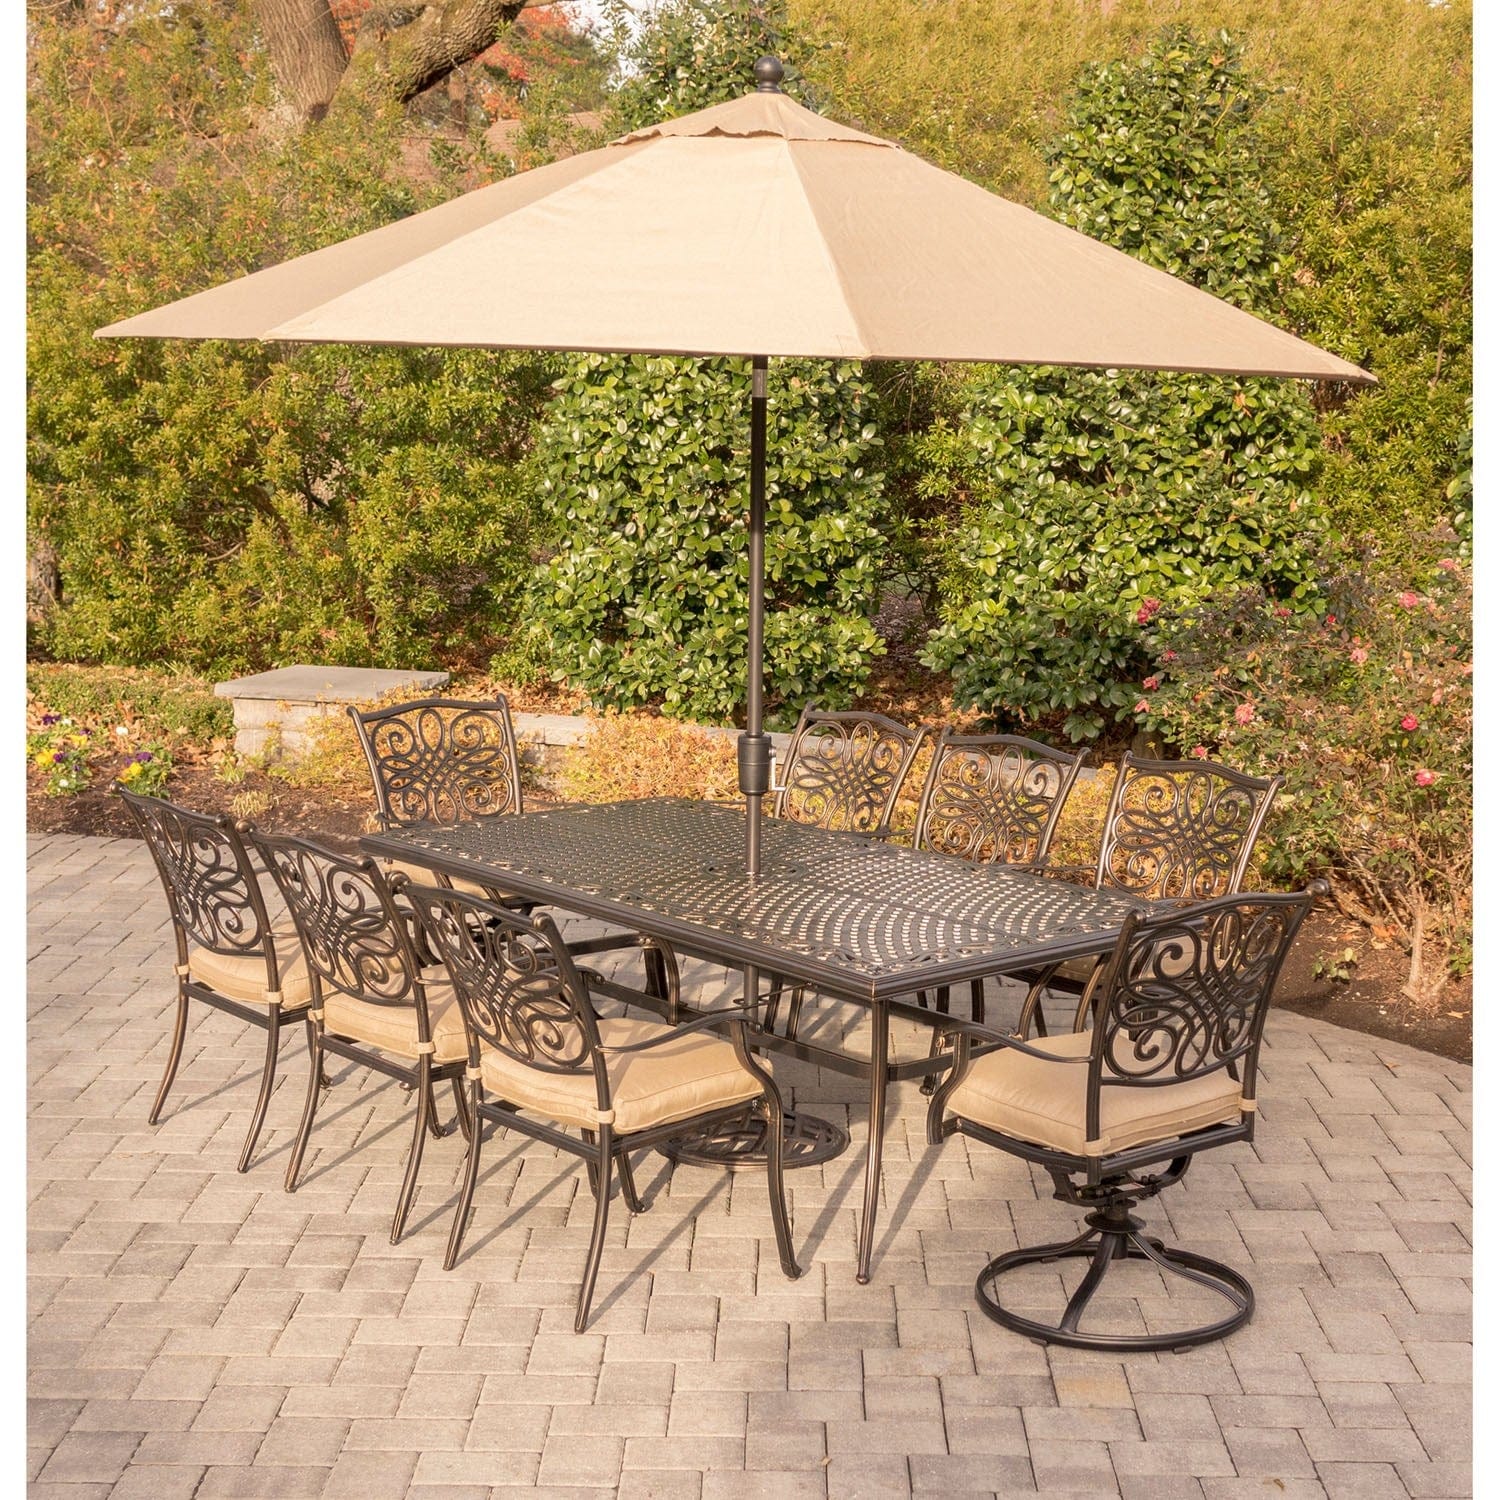 Hanover Outdoor Dining Set Hanover Traditions 9-Piece Aluminum Frame Dining Set in Tan with Extra-Long Cast-Top Dining Table, 11 Ft. Table Umbrella, and Umbrella Stand | TRADDN9PCSW2-SU